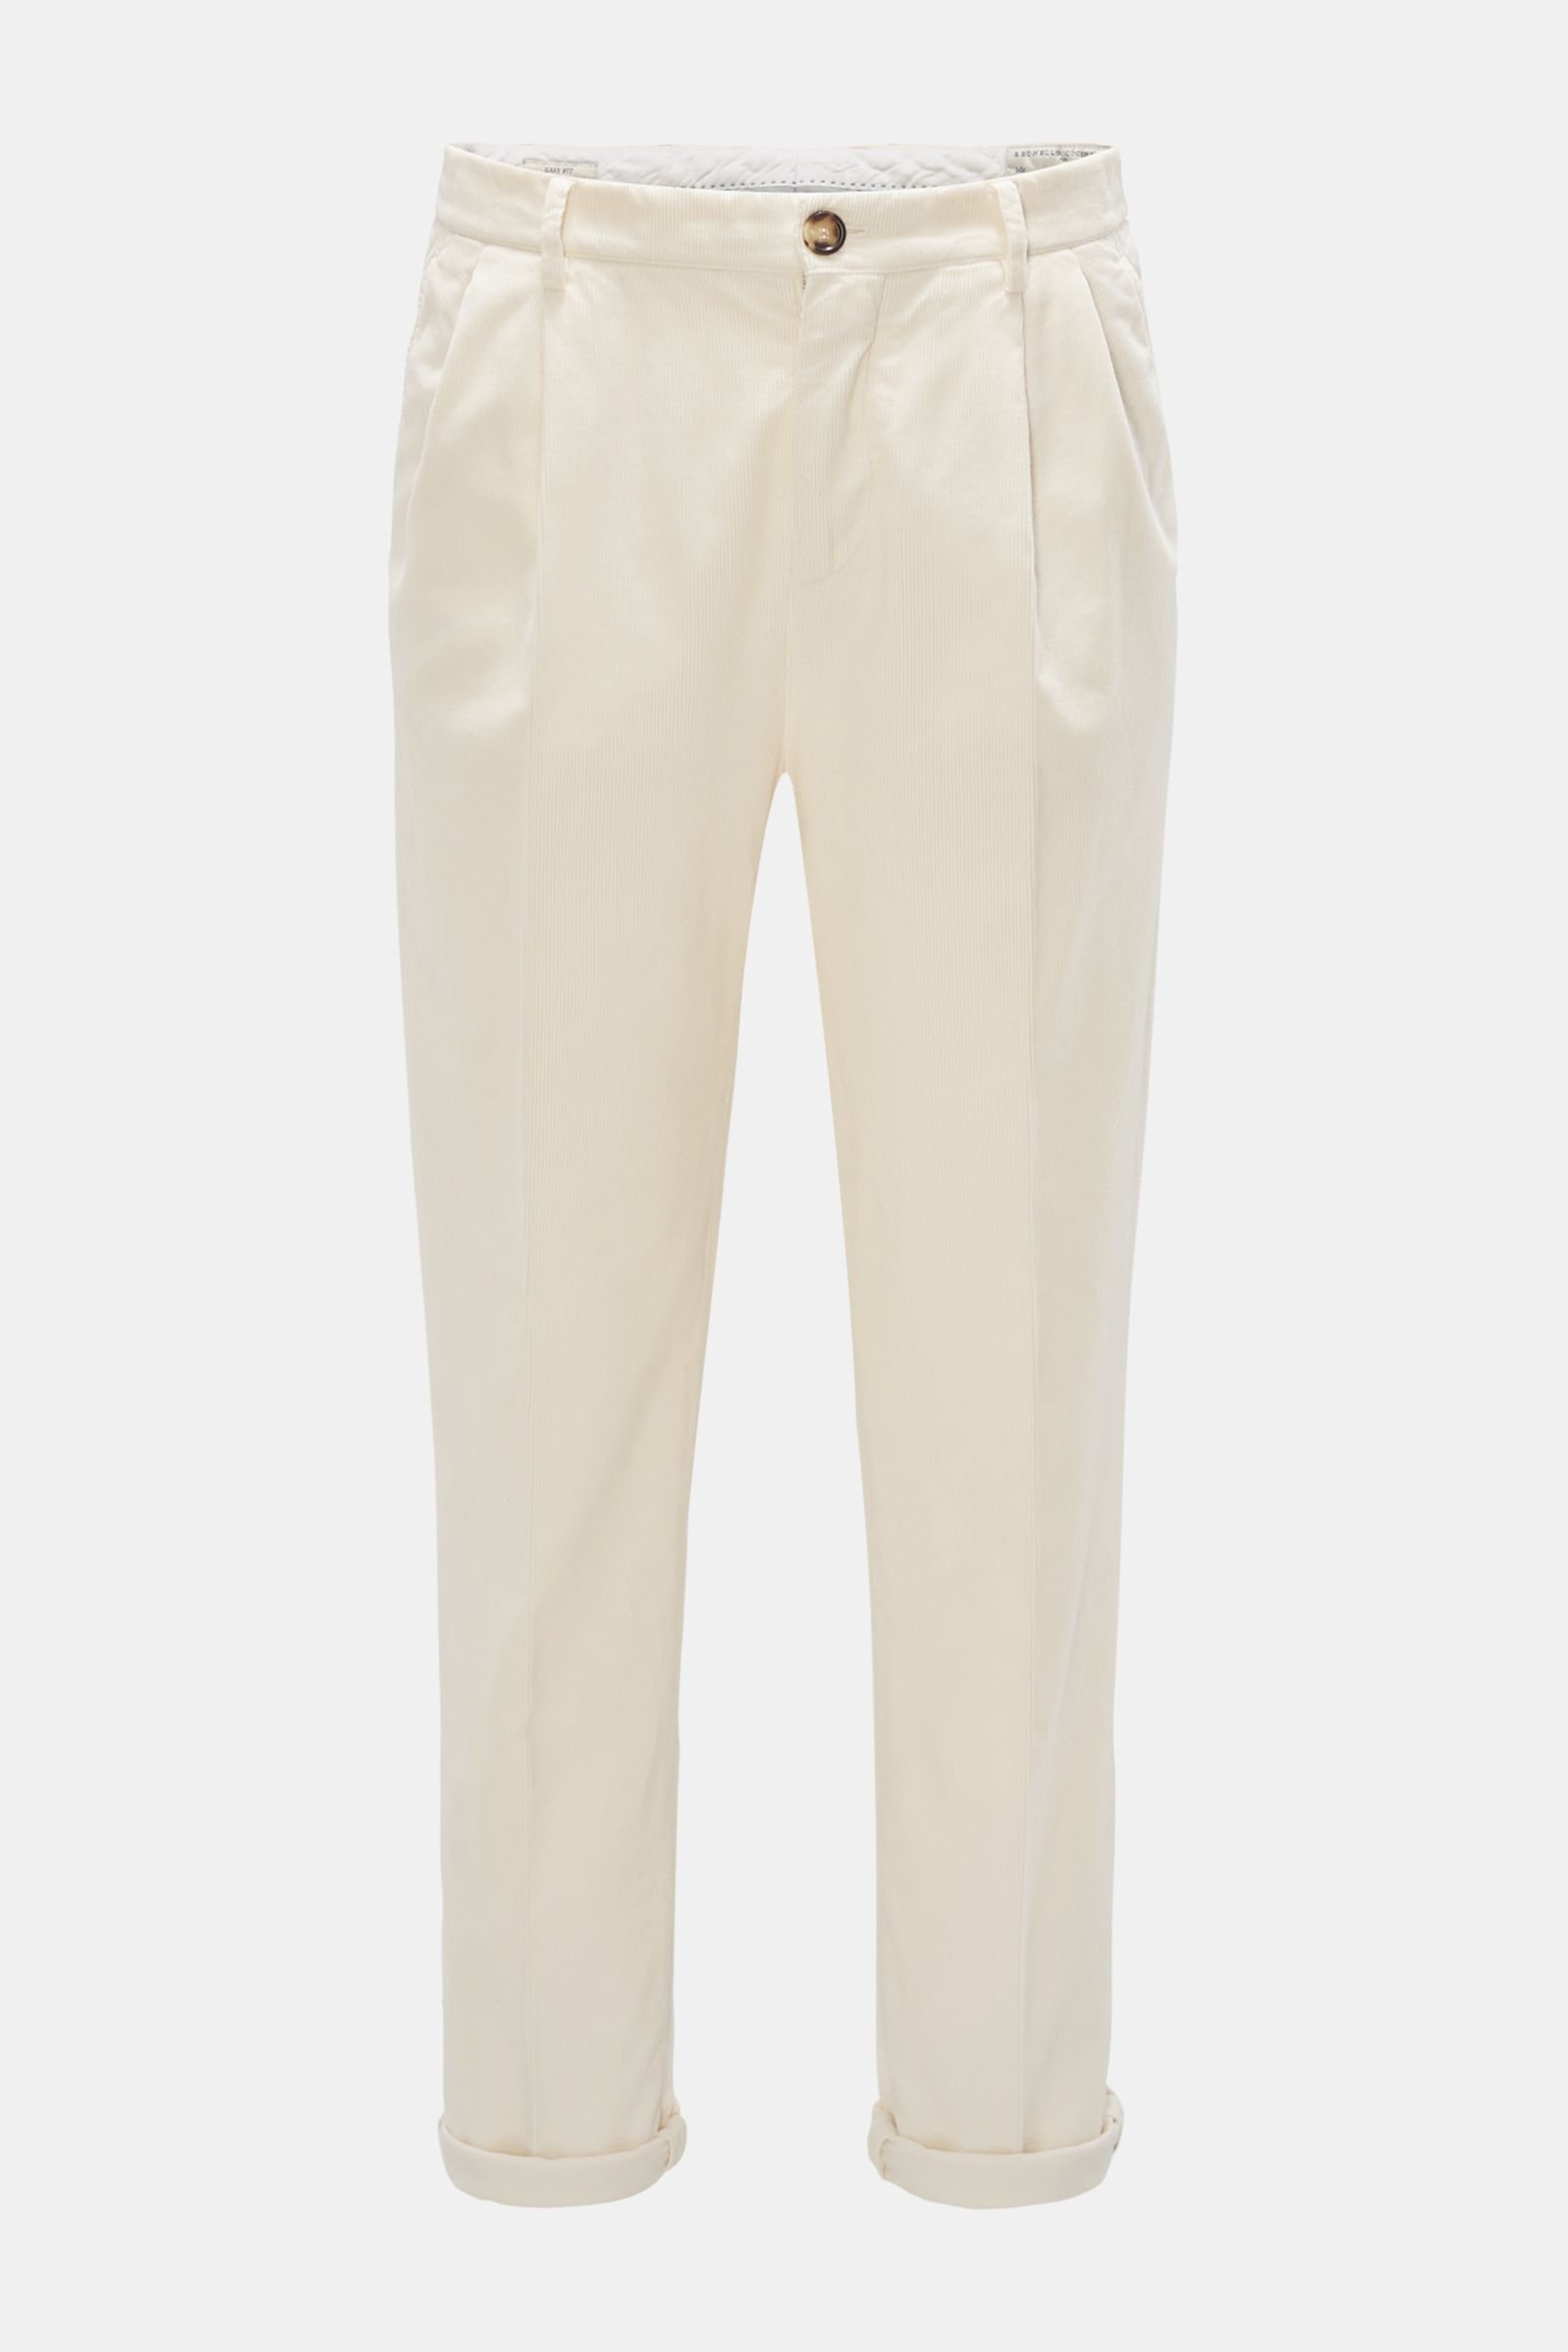 O'Connell's Vintage Embroidered Corduroy Trousers - Tennis